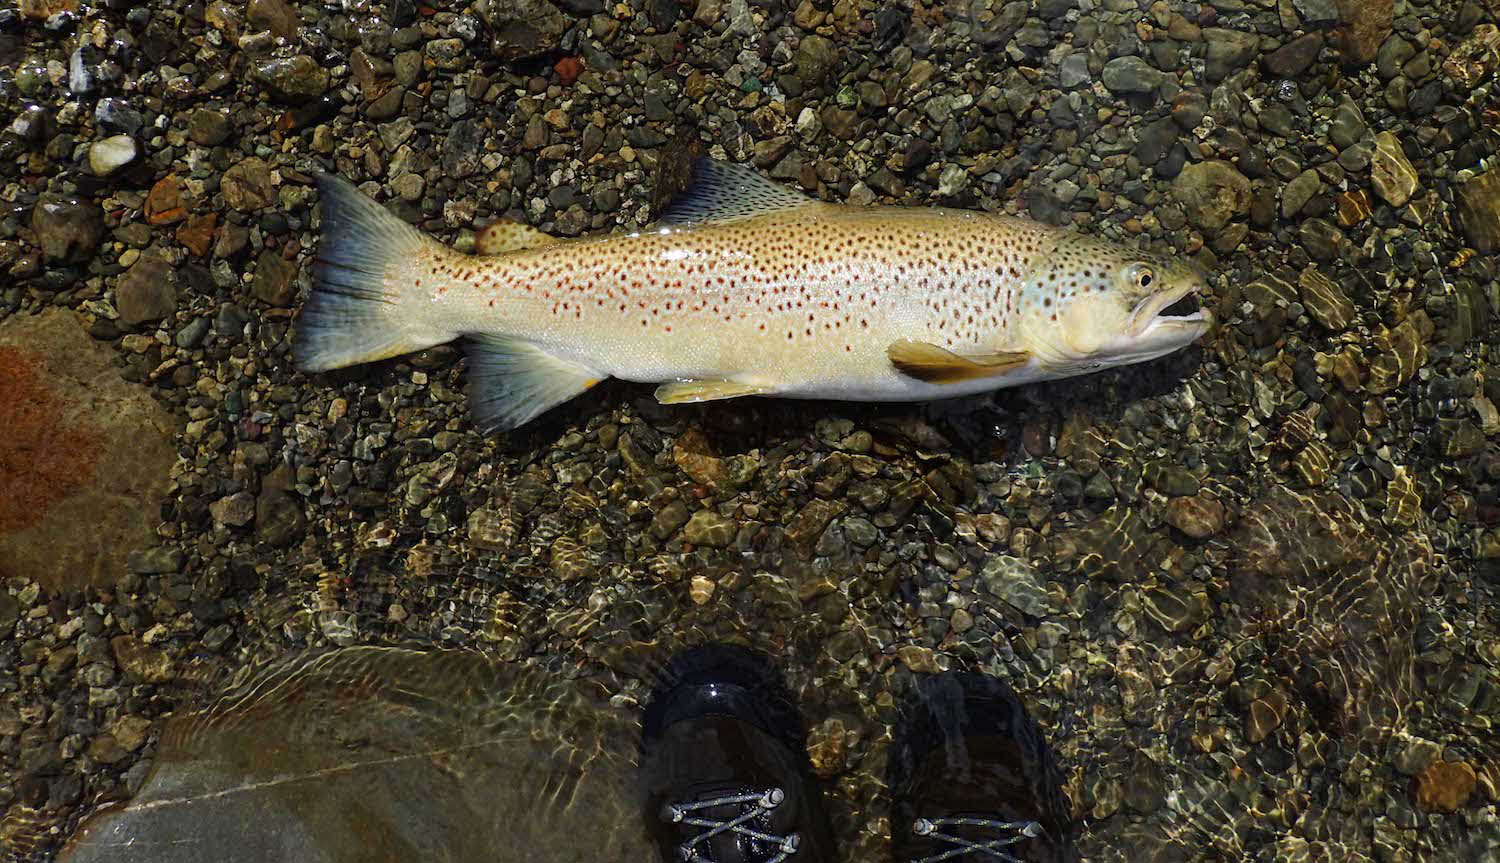 healthy brown trout posed for a photograph in pebbly shallows of river